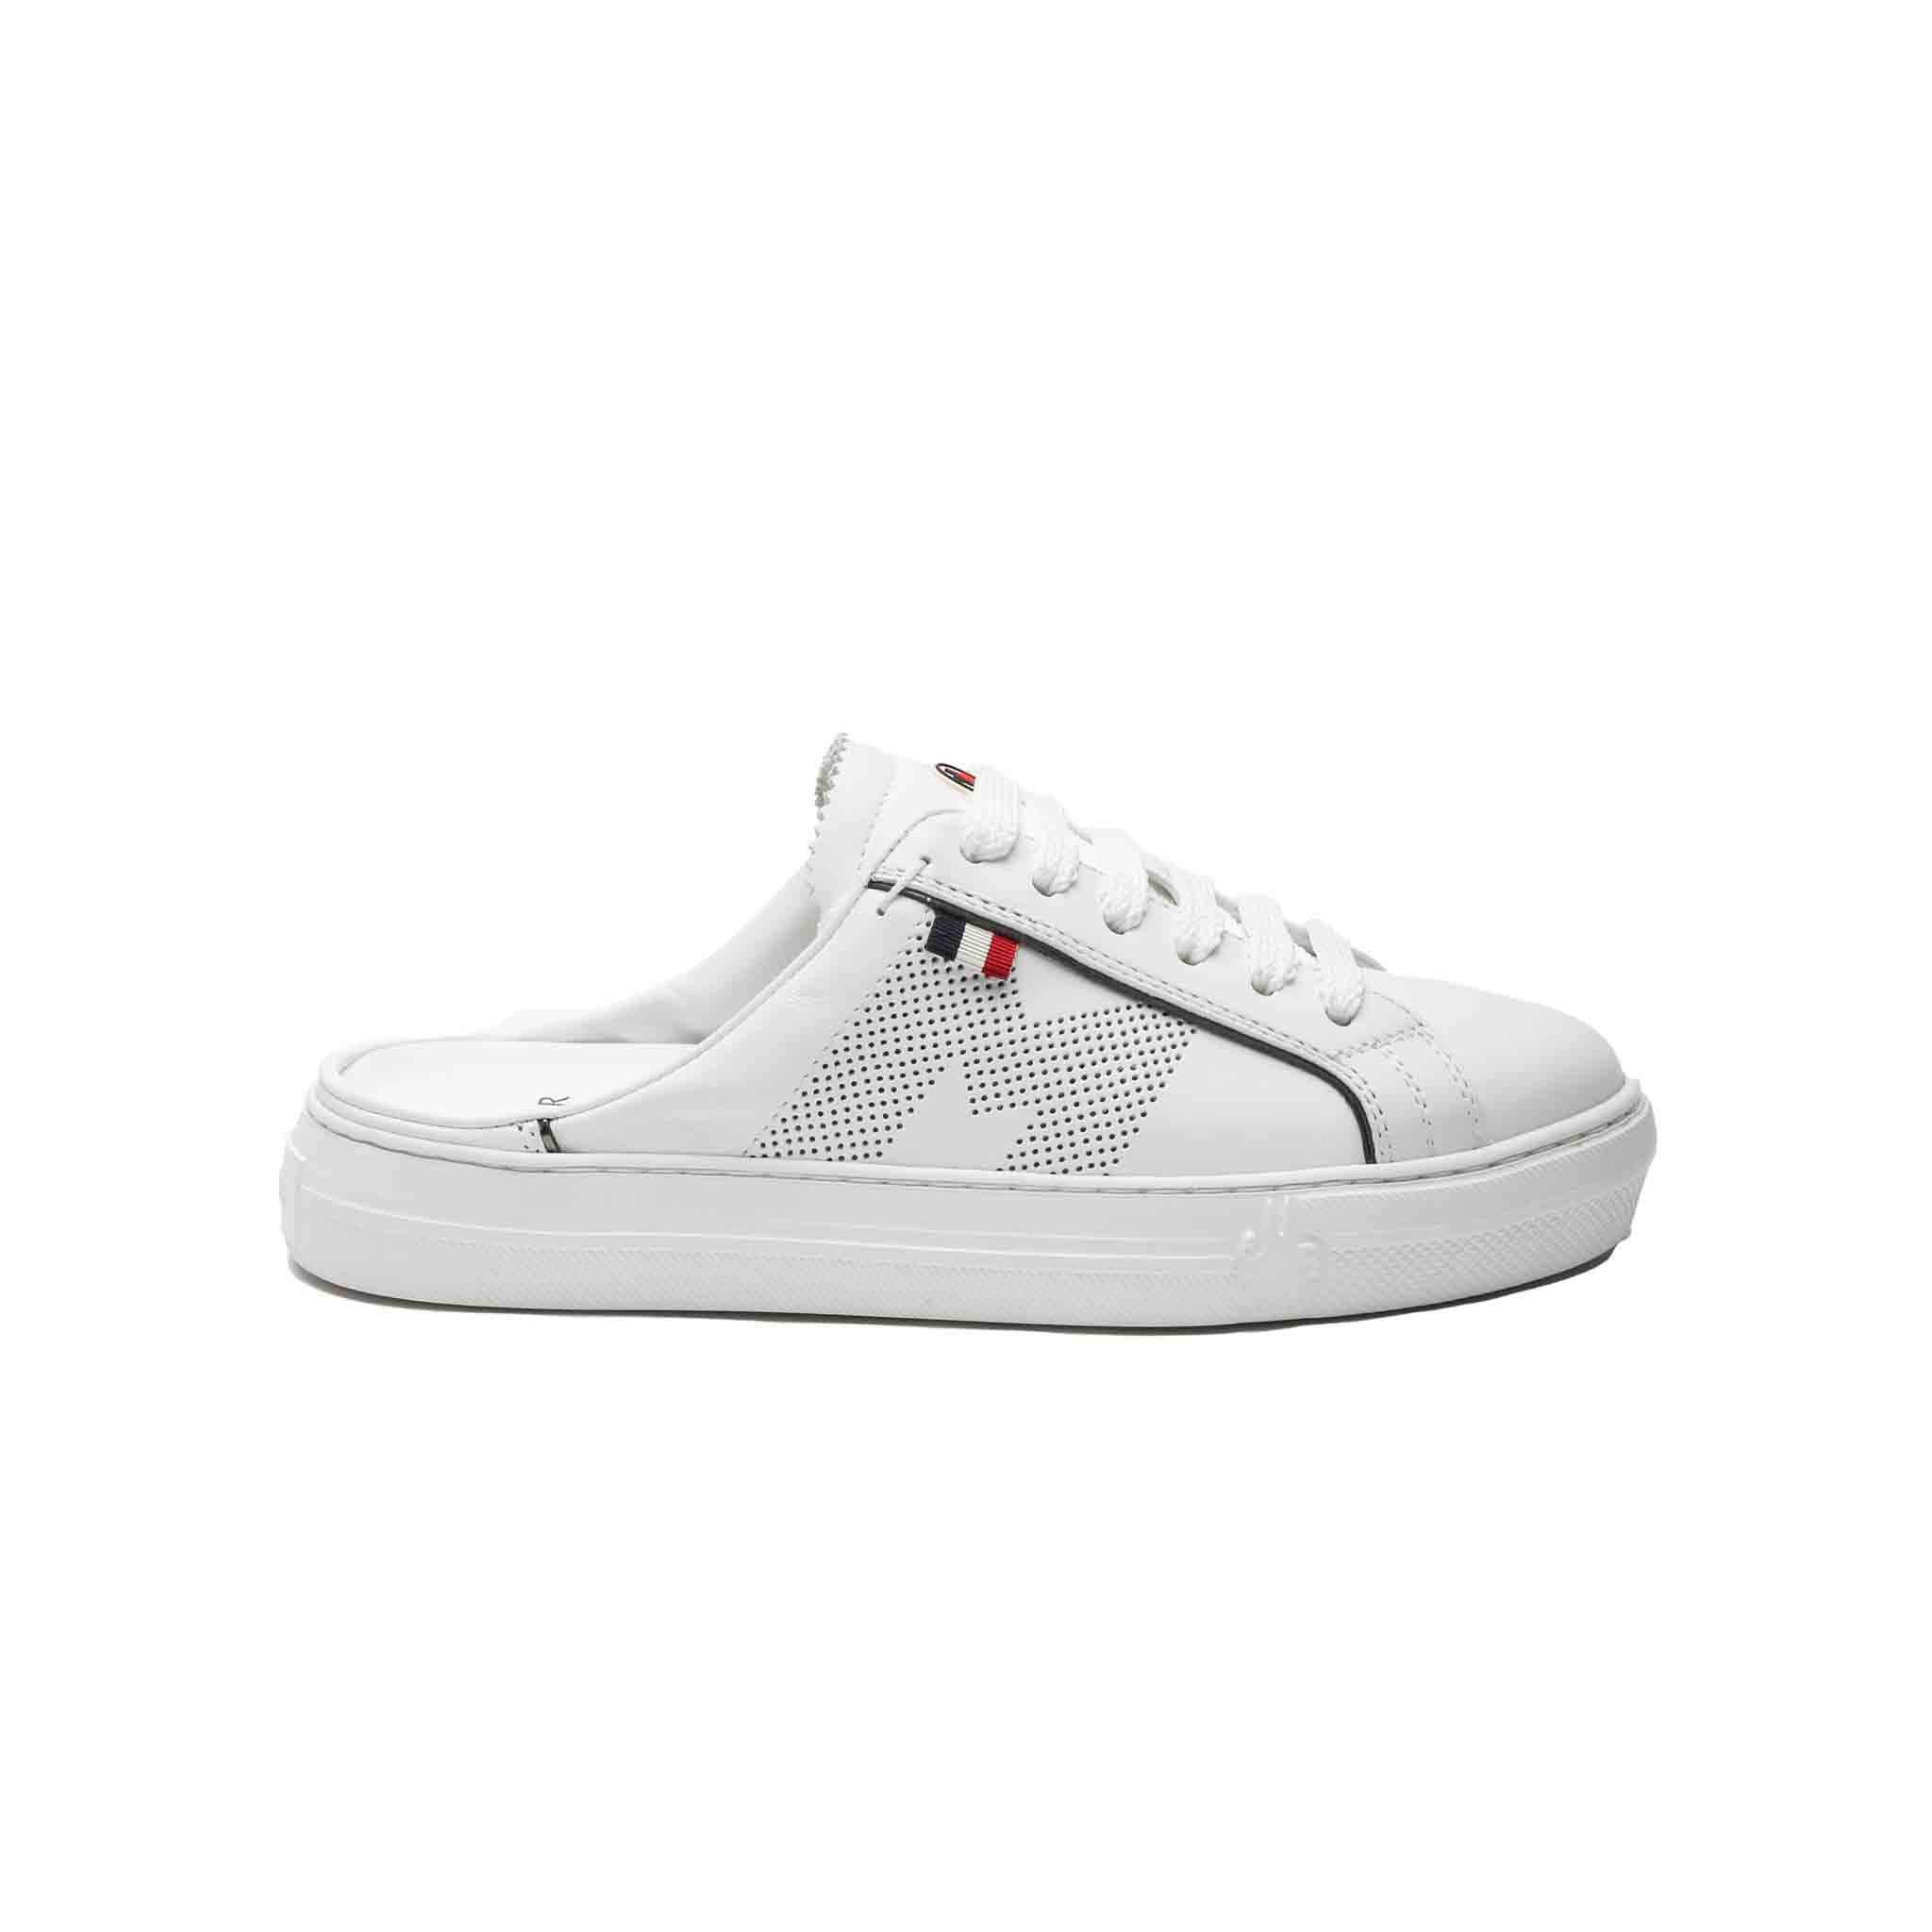 Classic Moncler Ariel sneaker has been given a summer face lift. Crafted from leather these are ideal for sitting around the pool or walking through the city. Moncler logo to the tongue with tri-colour tab to the side. Large perforated 